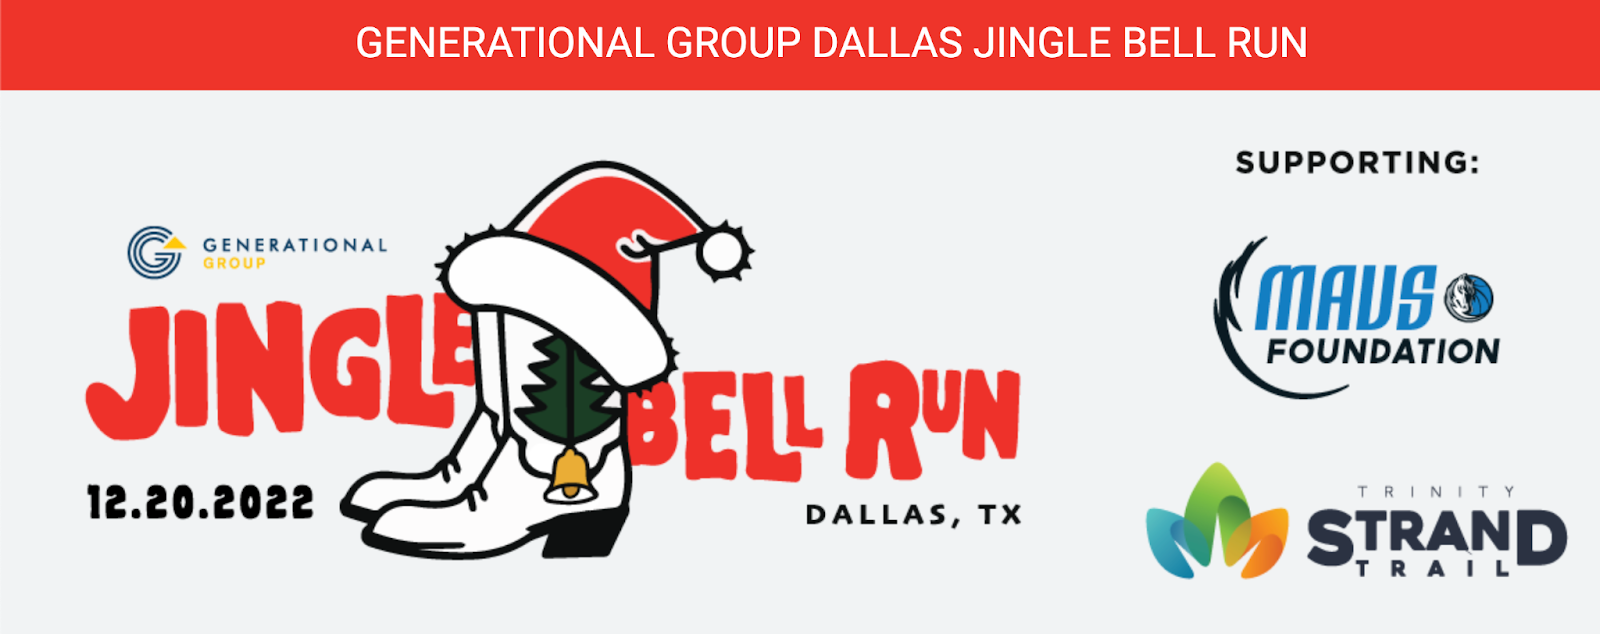 holiday fundraiser ideas, the Jingle Bell Run is an example of a fun fundraiser run that supports local organizations like the Mavs Foundation and Trinity Strand Trail 